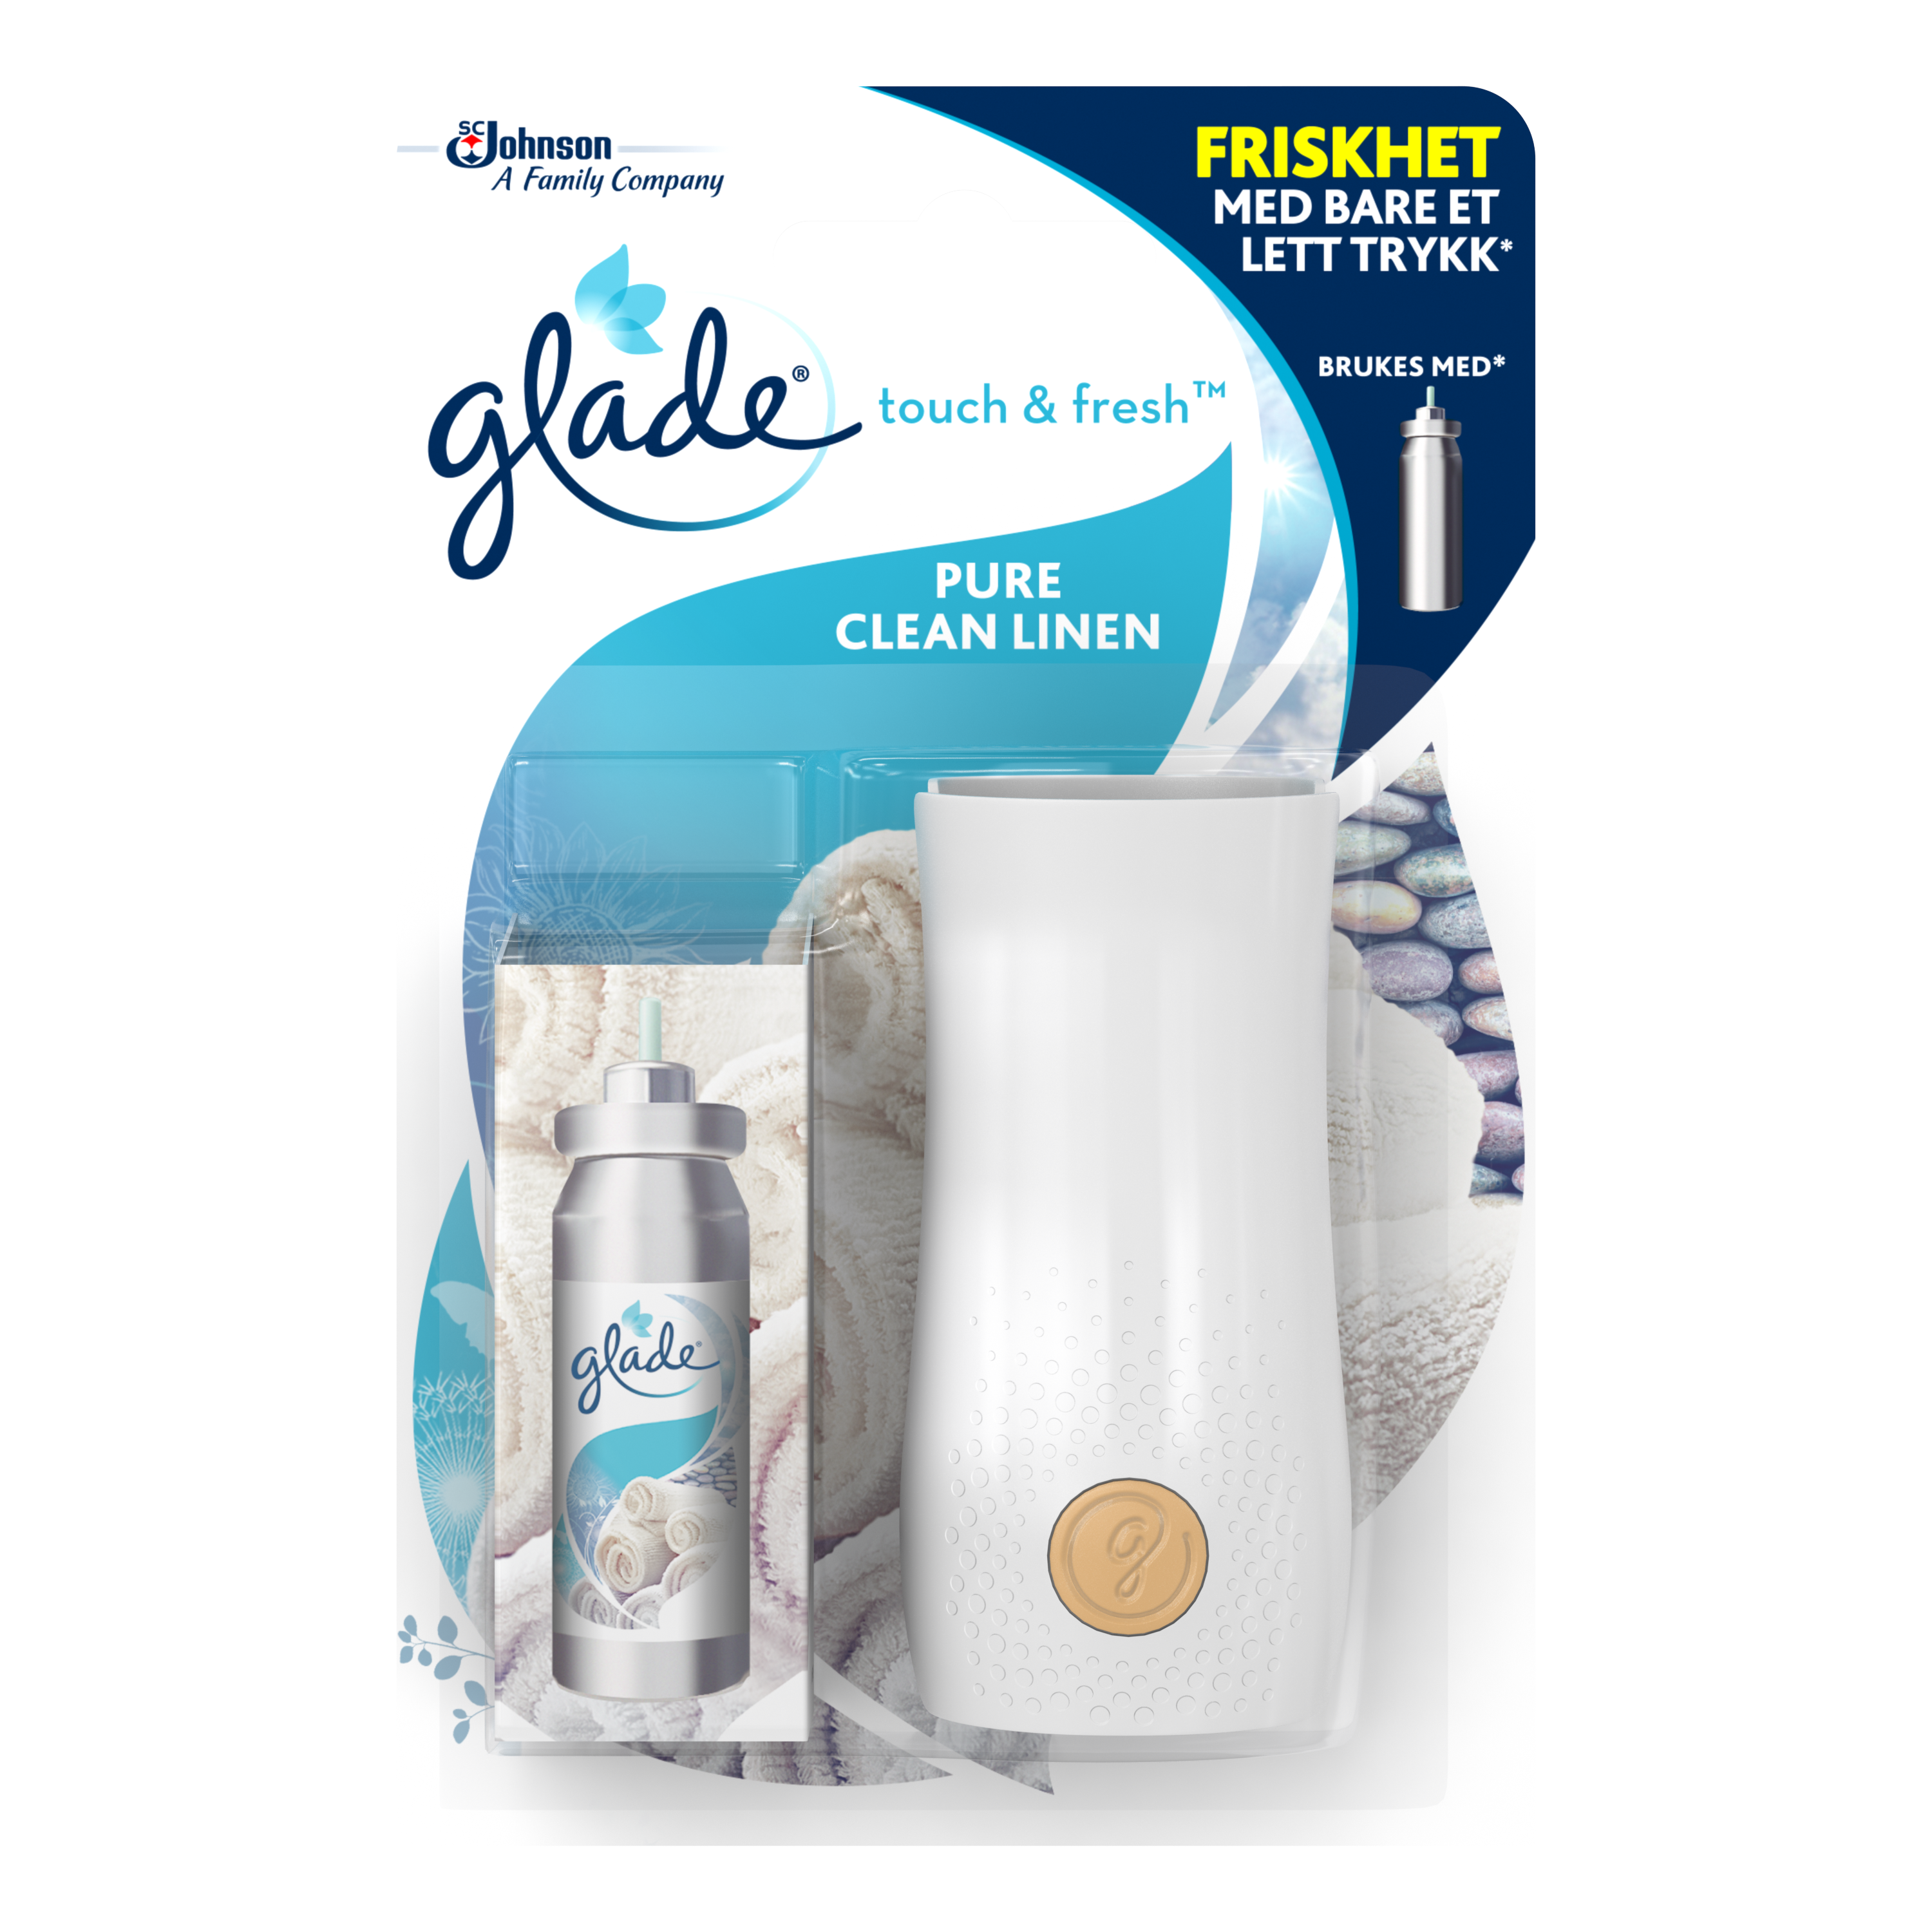 Glade® Touch & Fresh - Pure Clean Linen Holder